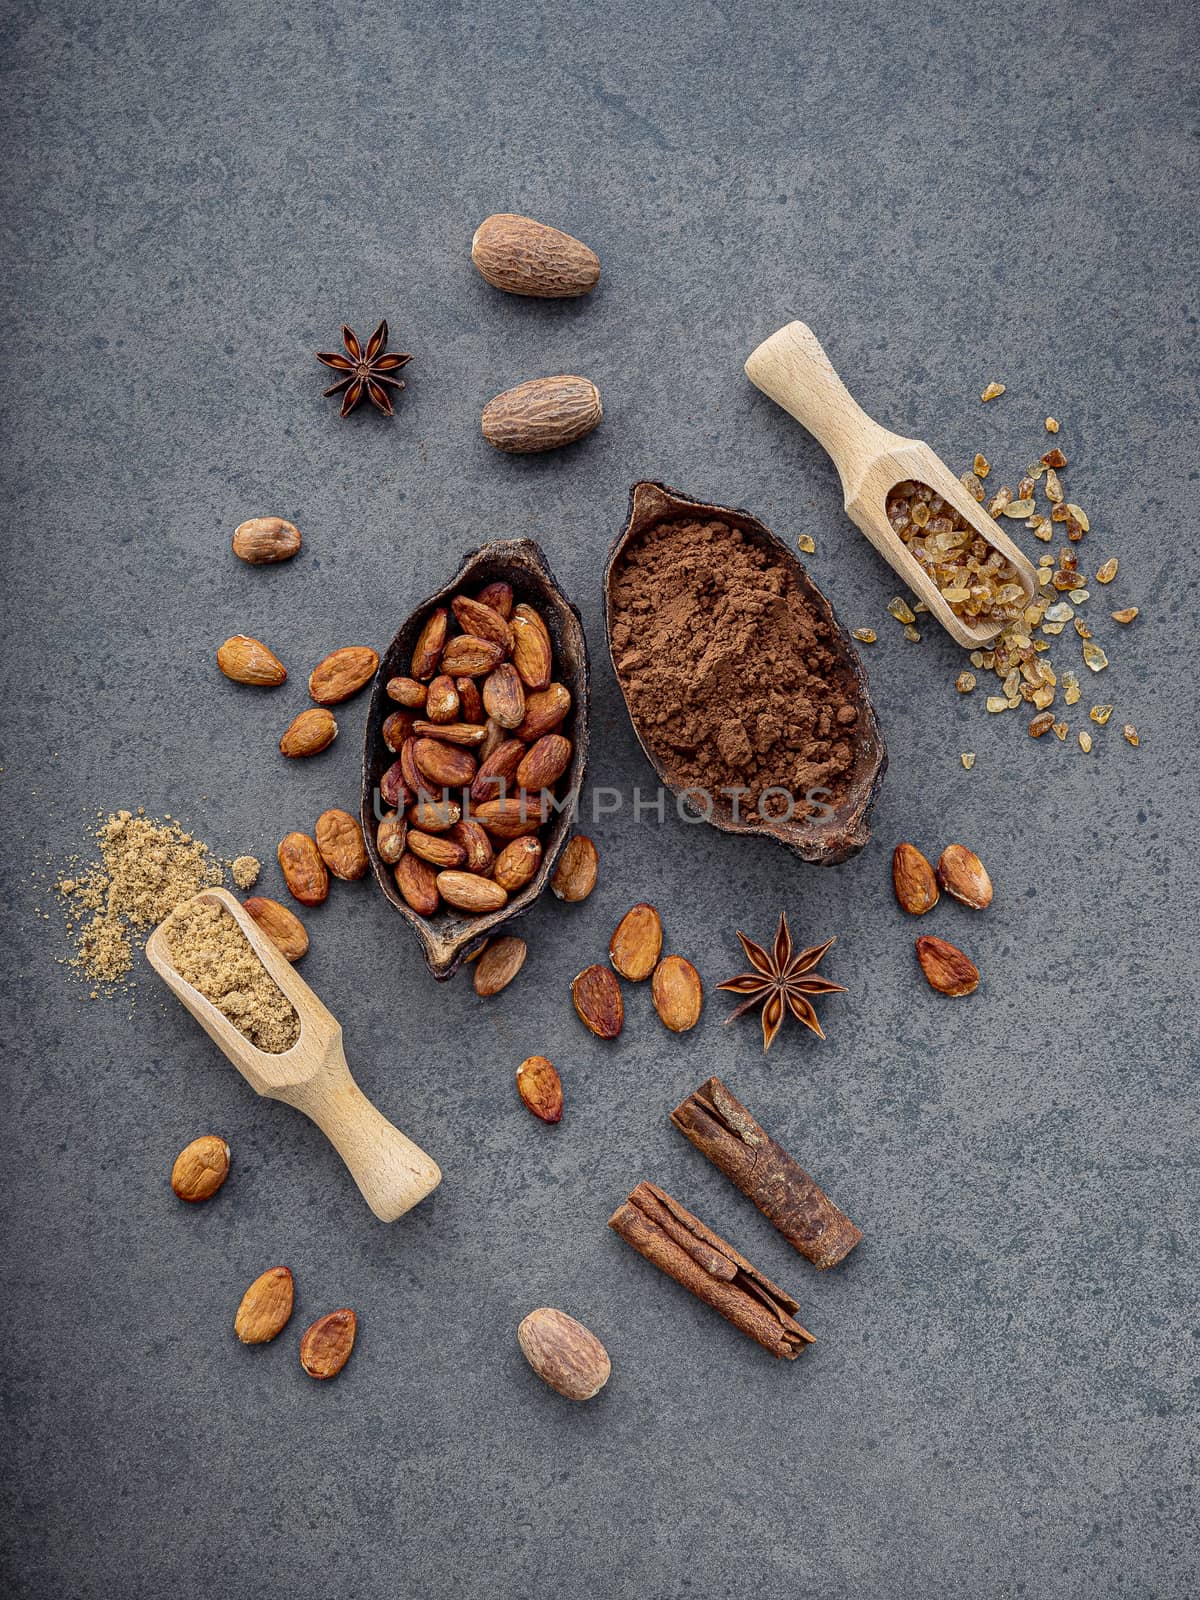 Cocoa powder and cacao beans on stone background. by kerdkanno